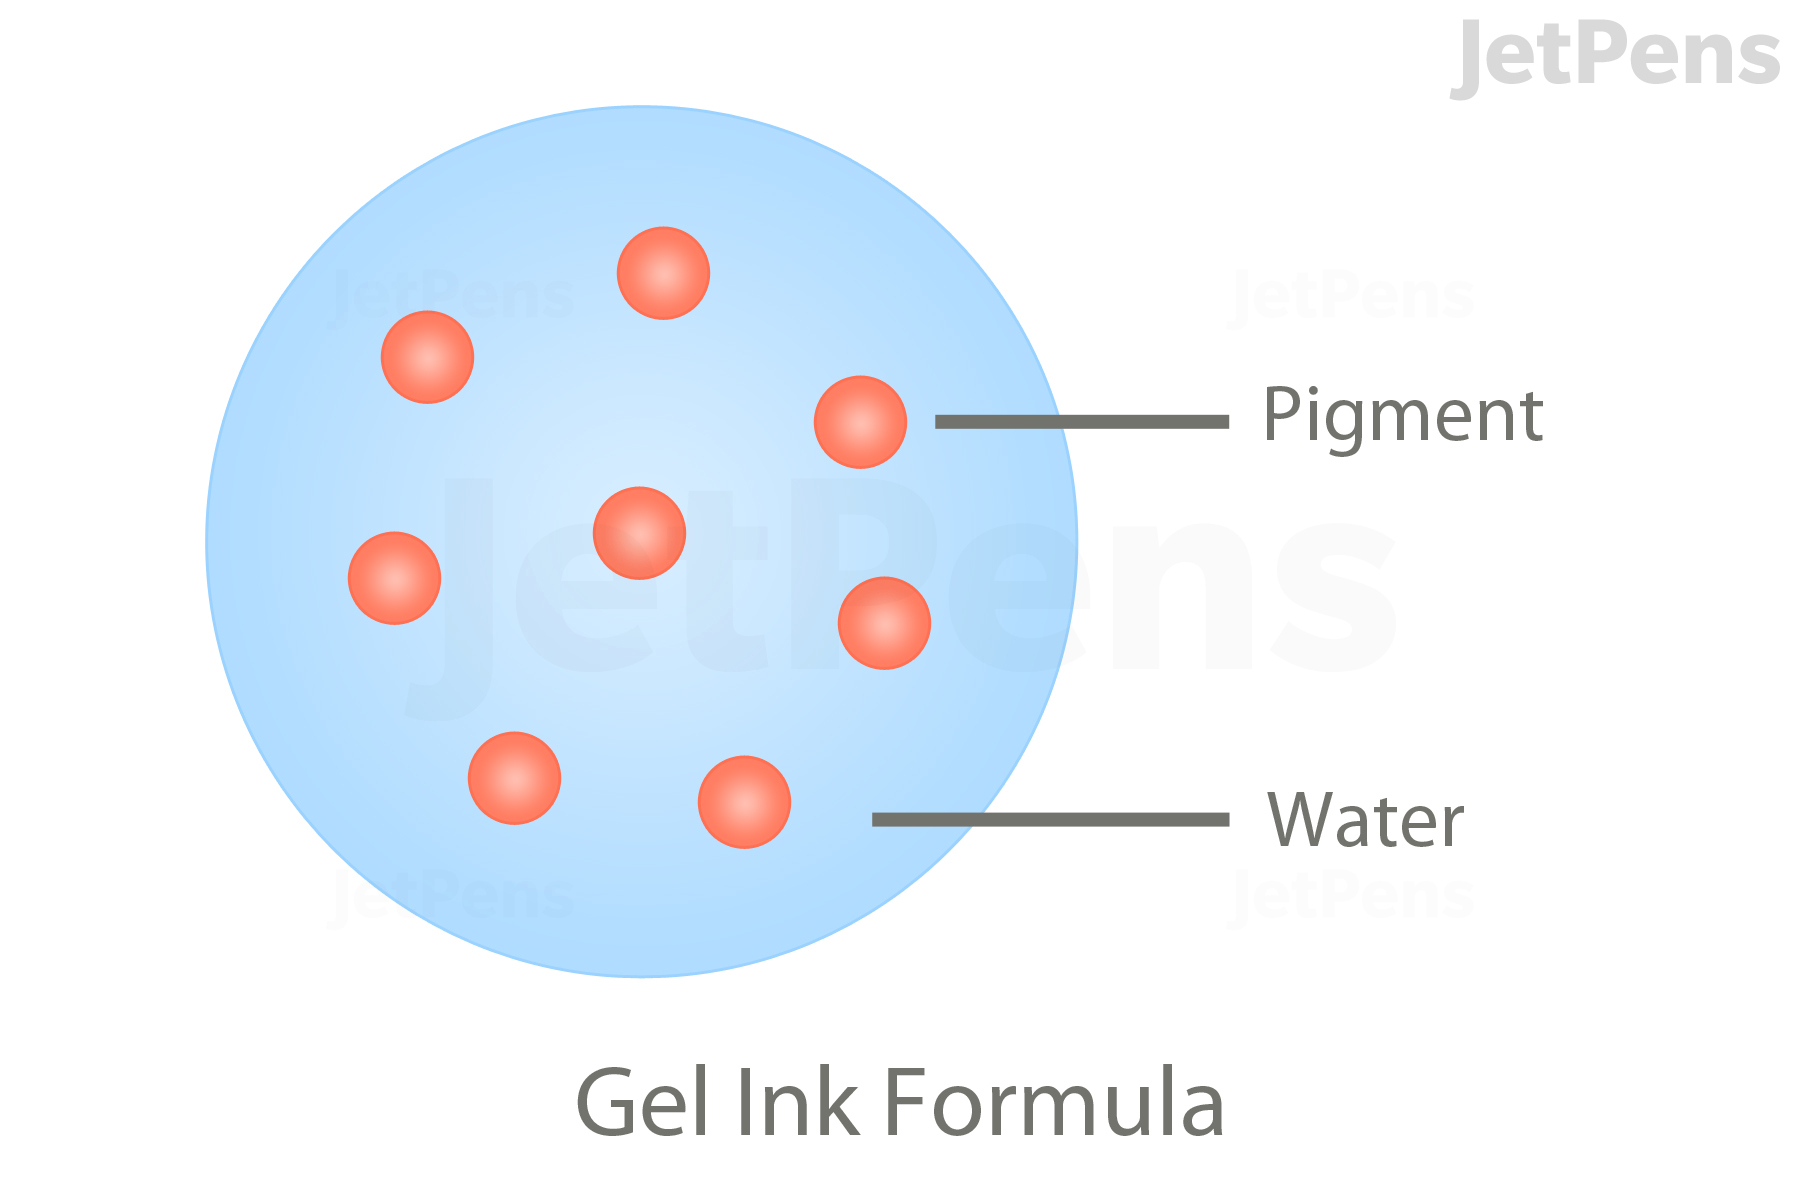 Gel ink consists of pigment suspended in a water-based gel.